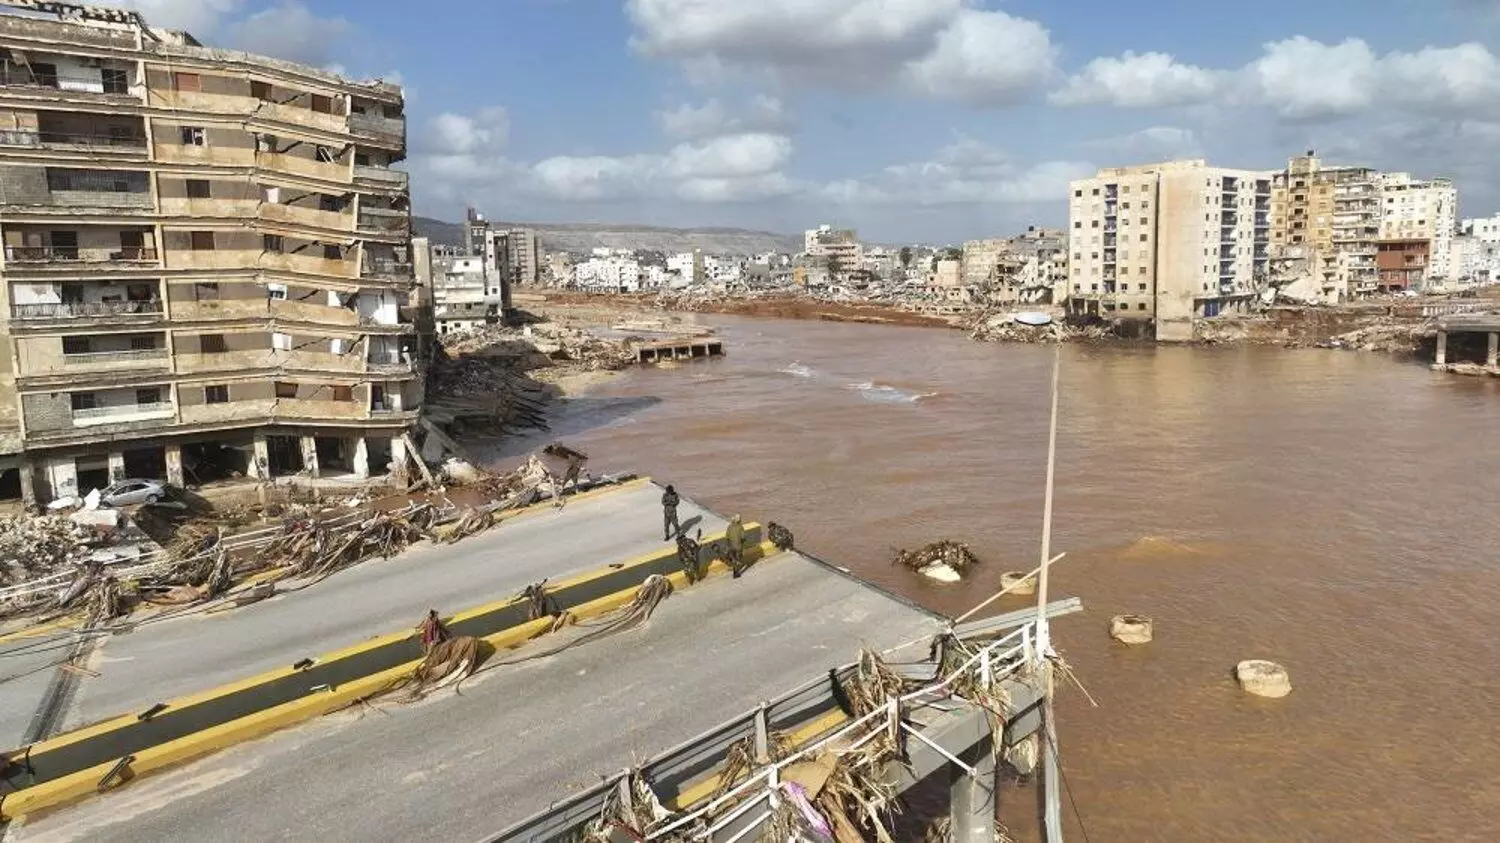 Libya: Two dams collapse after flooding devastated an eastern city, killing over 11,000